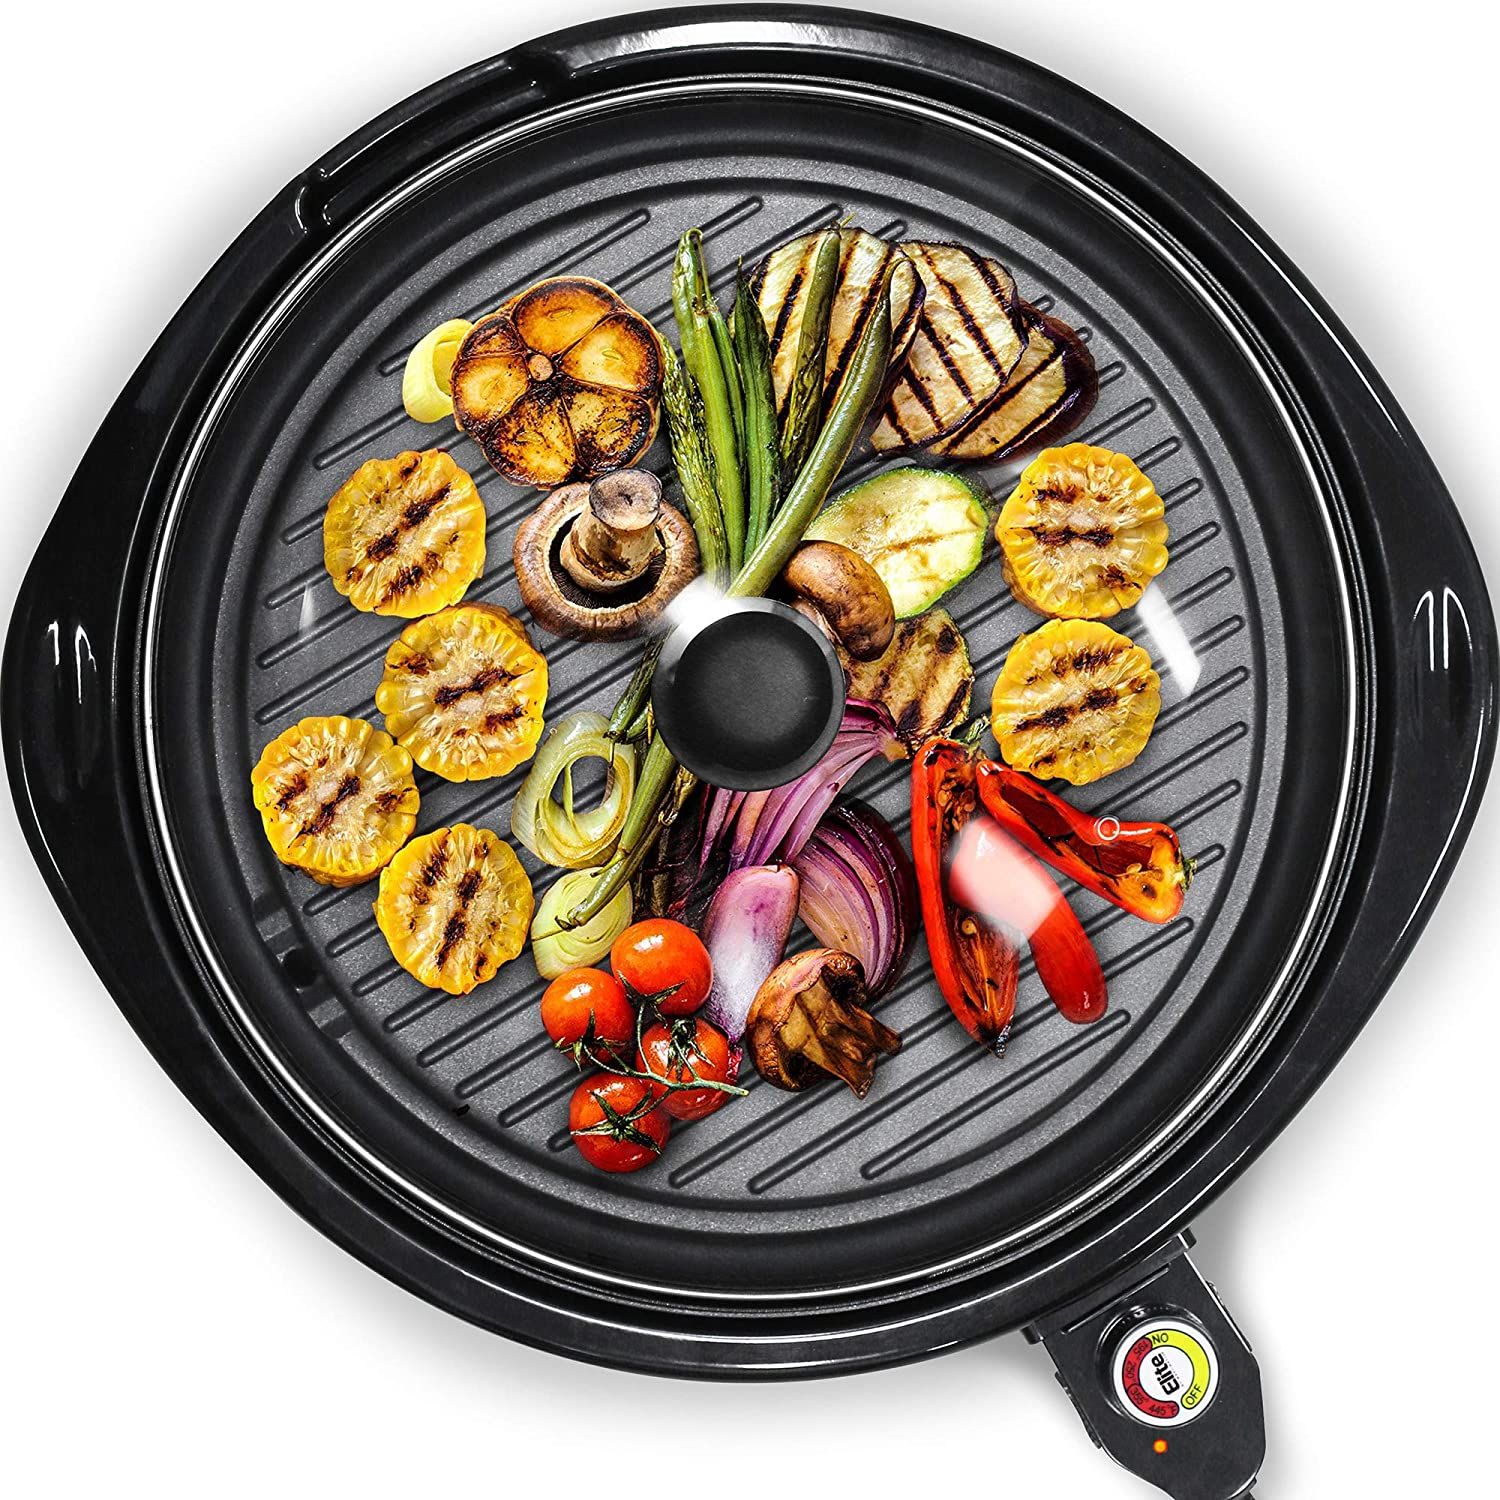 Maxi-Matic Smokeless Indoor Electric BBQ Grill With Glass Lid - $$title$$